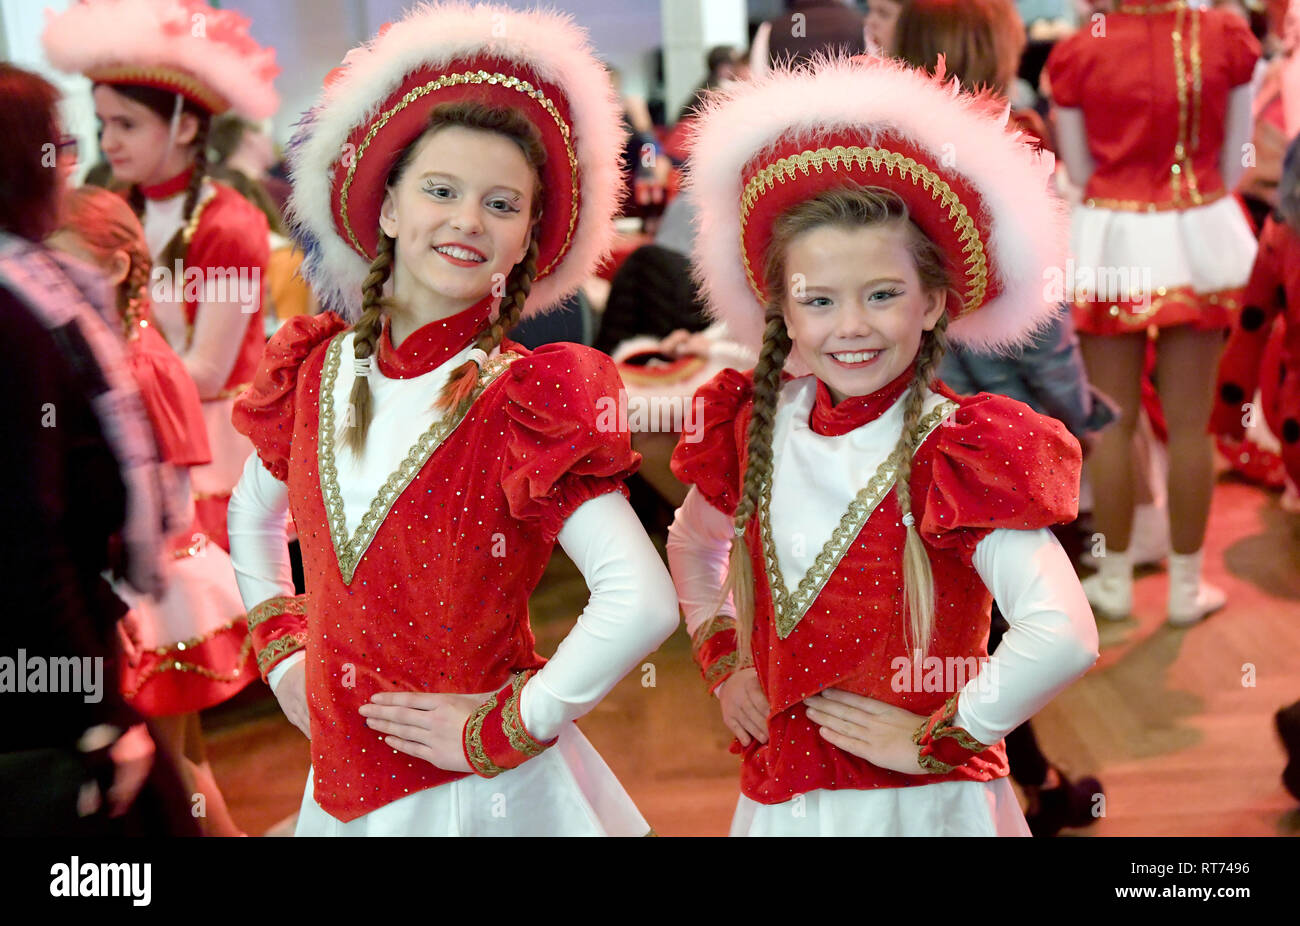 Marne, Germany. 24th Feb, 2019. Two dance mariechs at a performance at the children's carnival. The girls from the north German carnival stronghold Marne have about ten appearances during the foolish time in the north. There are no problems with the young dancers, who are divided into age groups. (to dpa 'The people behind the dike have carnival in their blood') Credit: Carsten Rehder/dpa/Alamy Live News Stock Photo